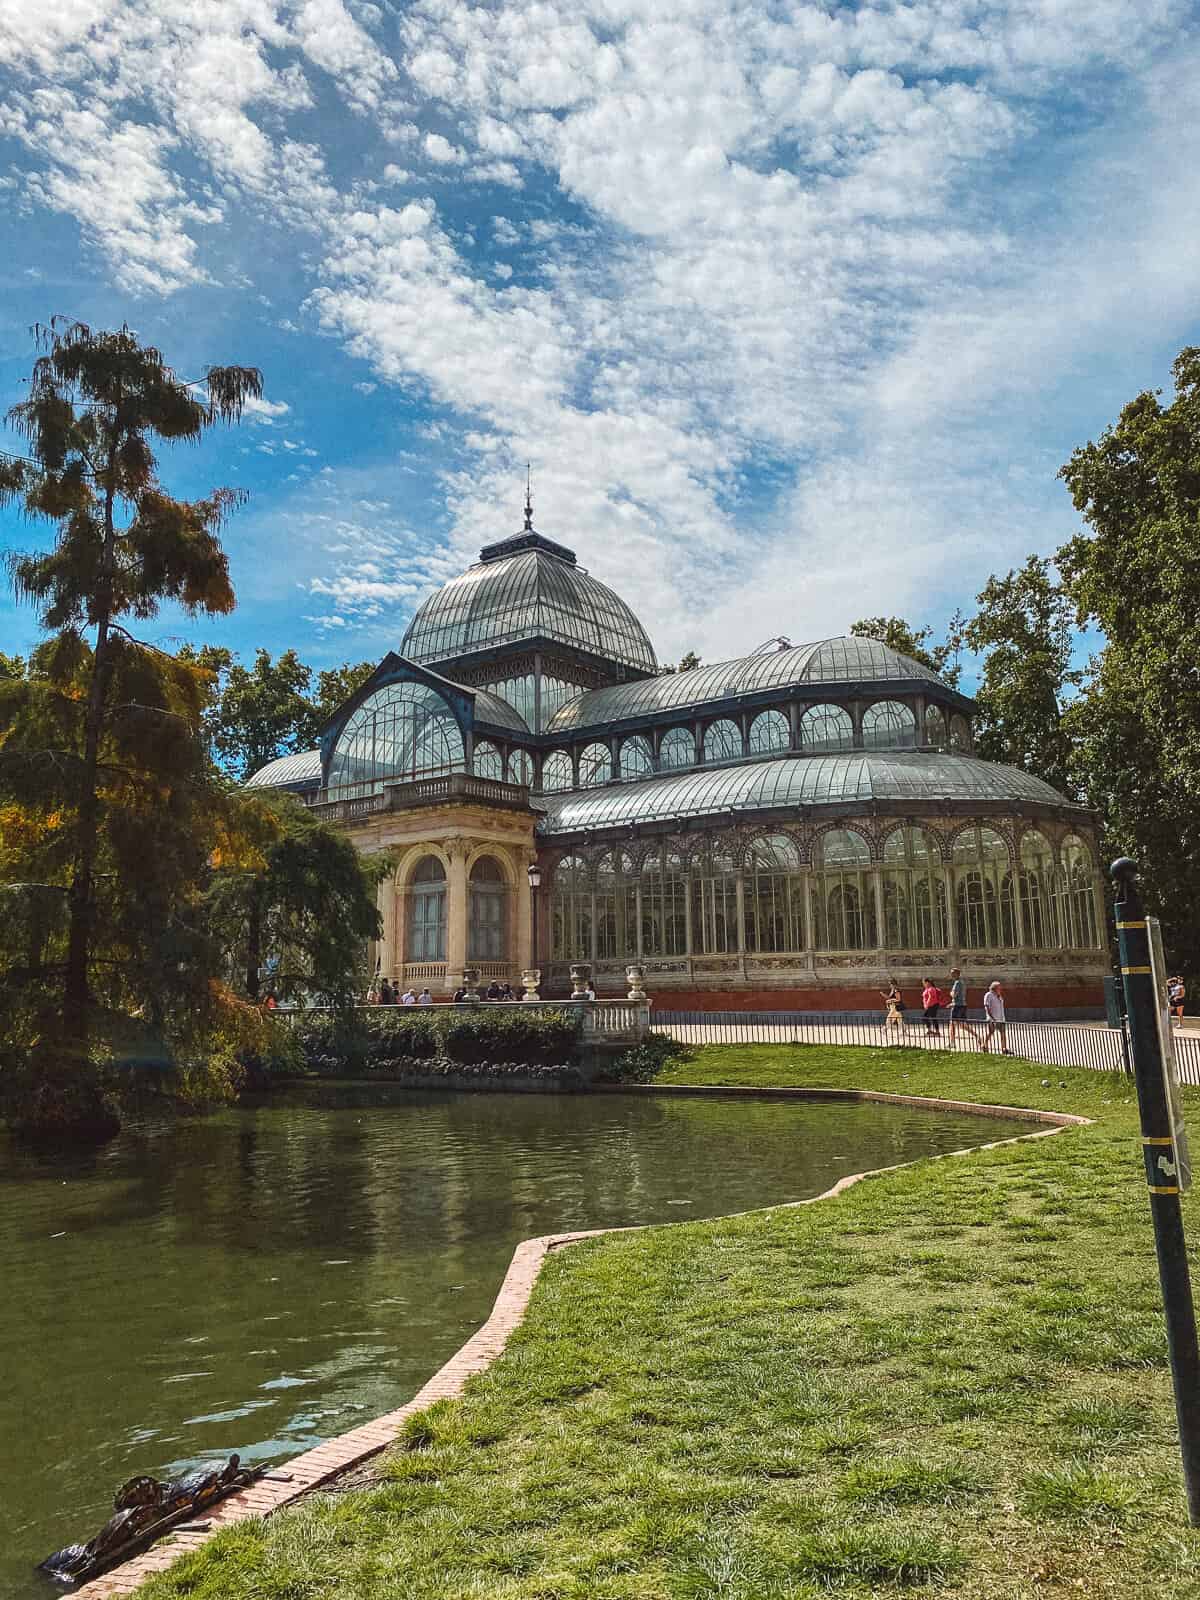 The Crystal Palace in Madrid's Retiro Park, a striking glass and metal structure reflecting the sunlight, set beside a tranquil pond with lush greenery and visitors enjoying the serene surroundings